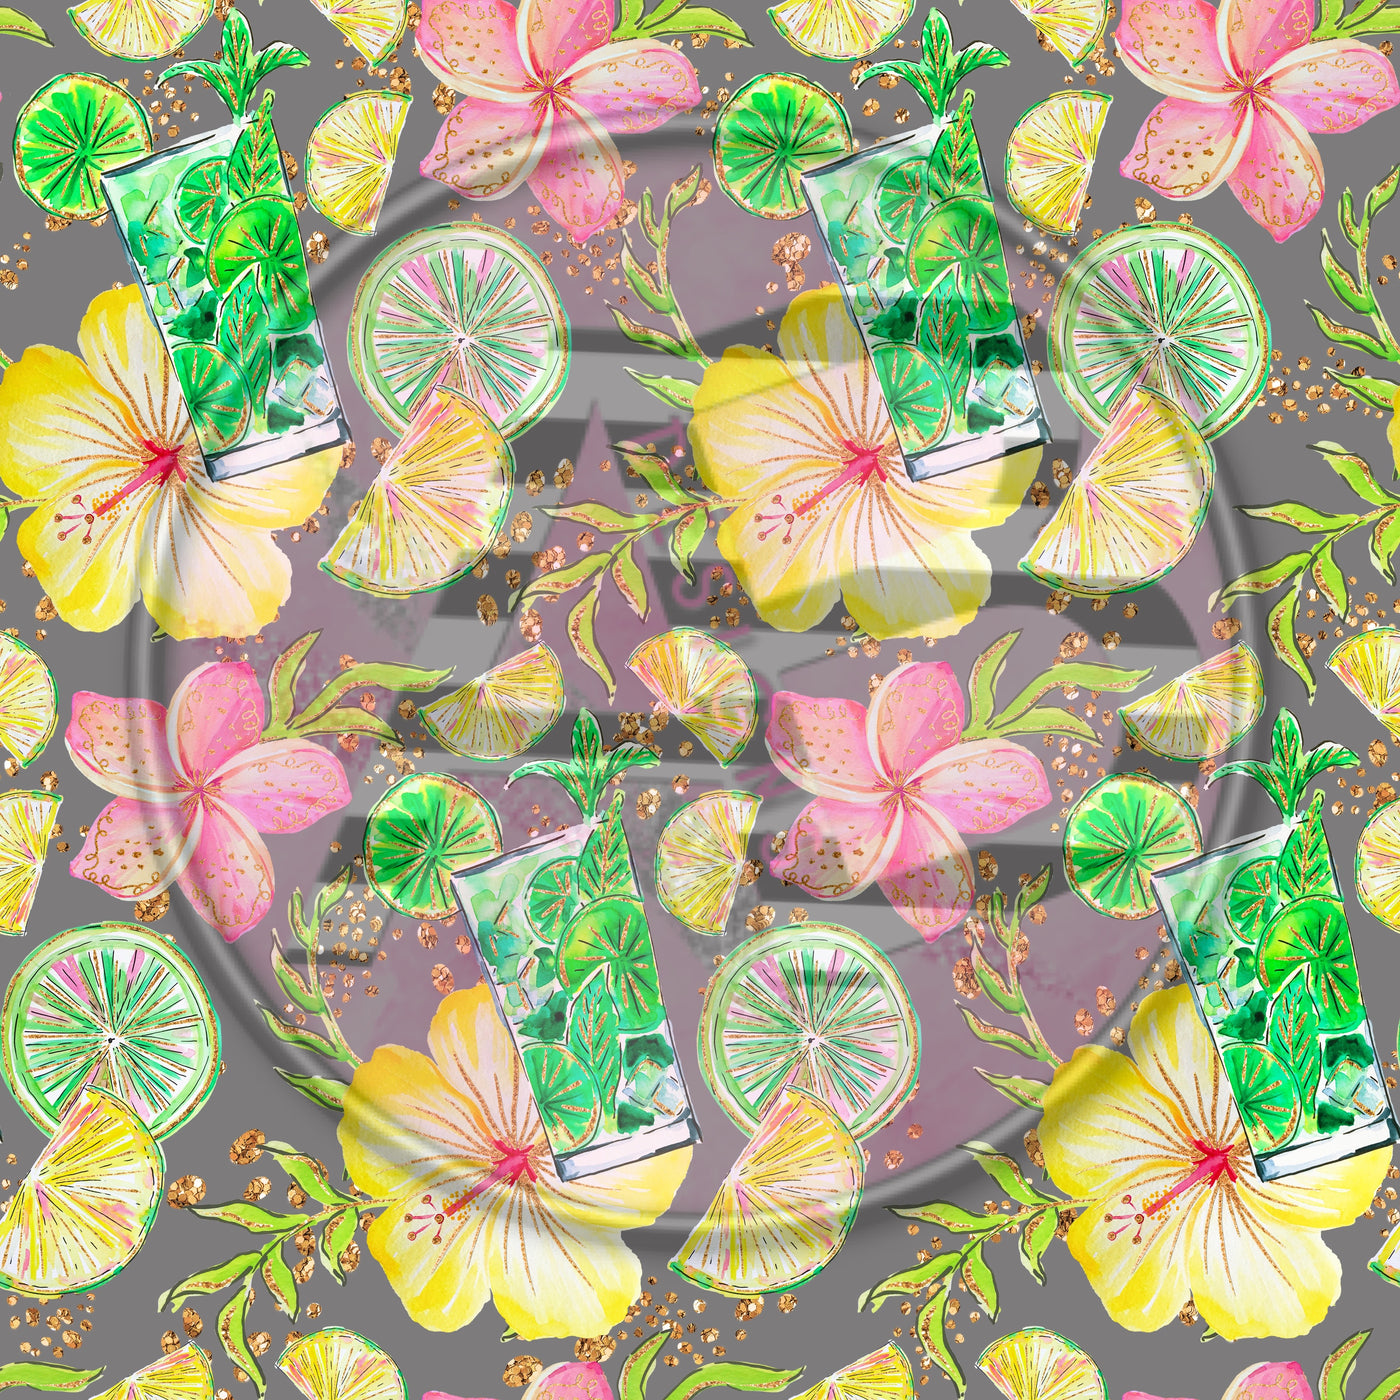 Adhesive Patterned Vinyl - Tropical 2120